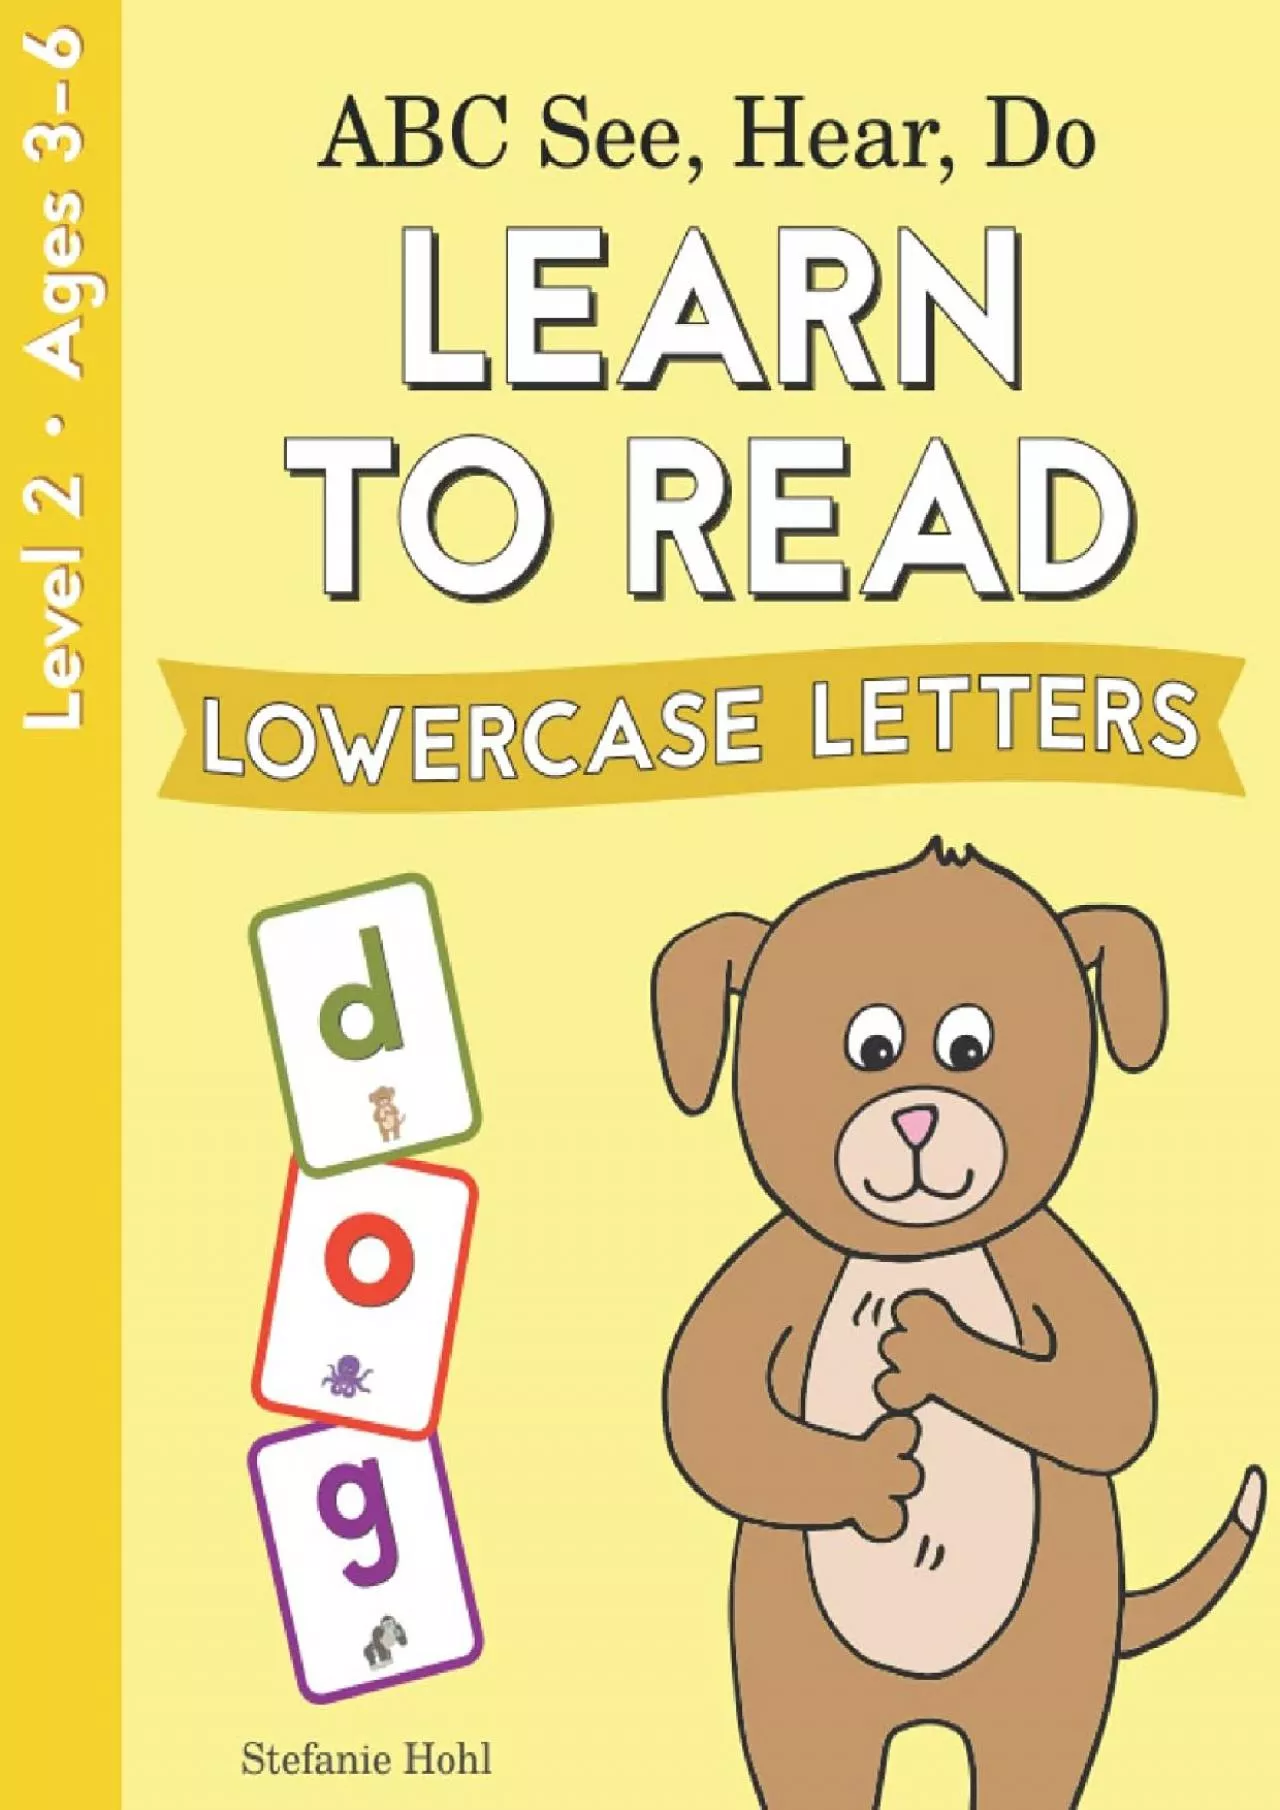 [EBOOK] ABC See Hear Do Level 2: Learn to Read Lowercase Letters